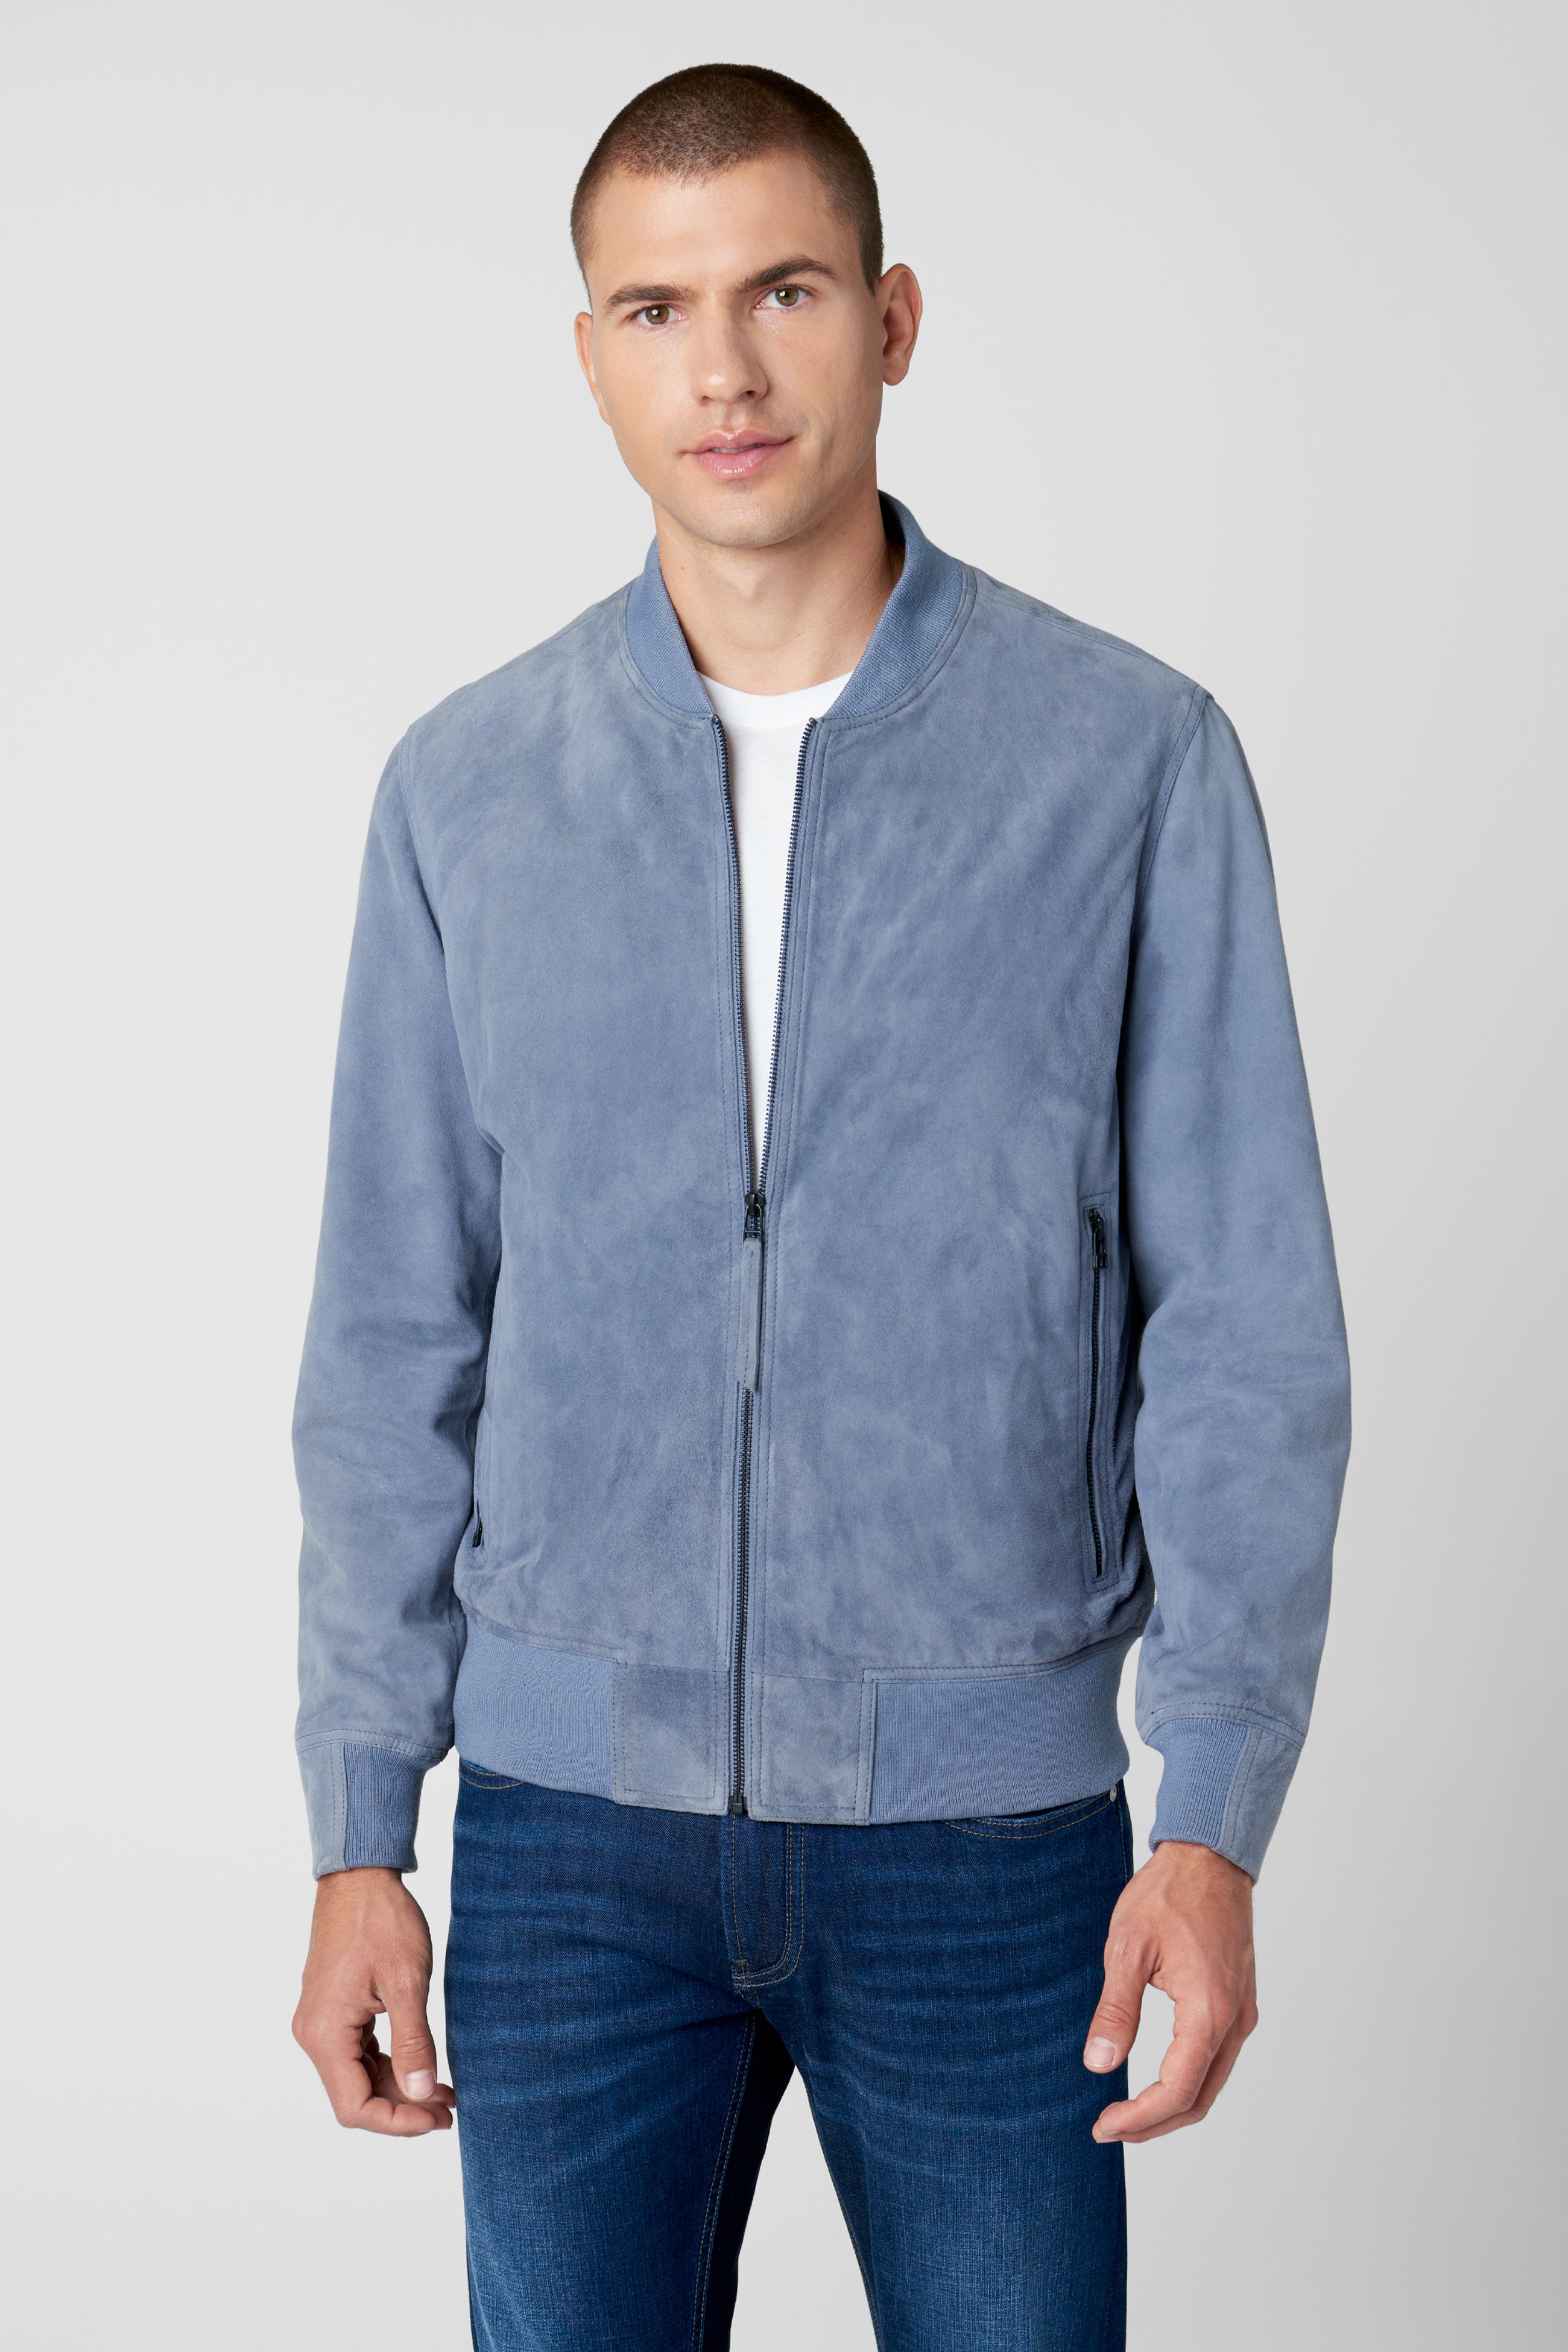 Back In The Saddle Bomber